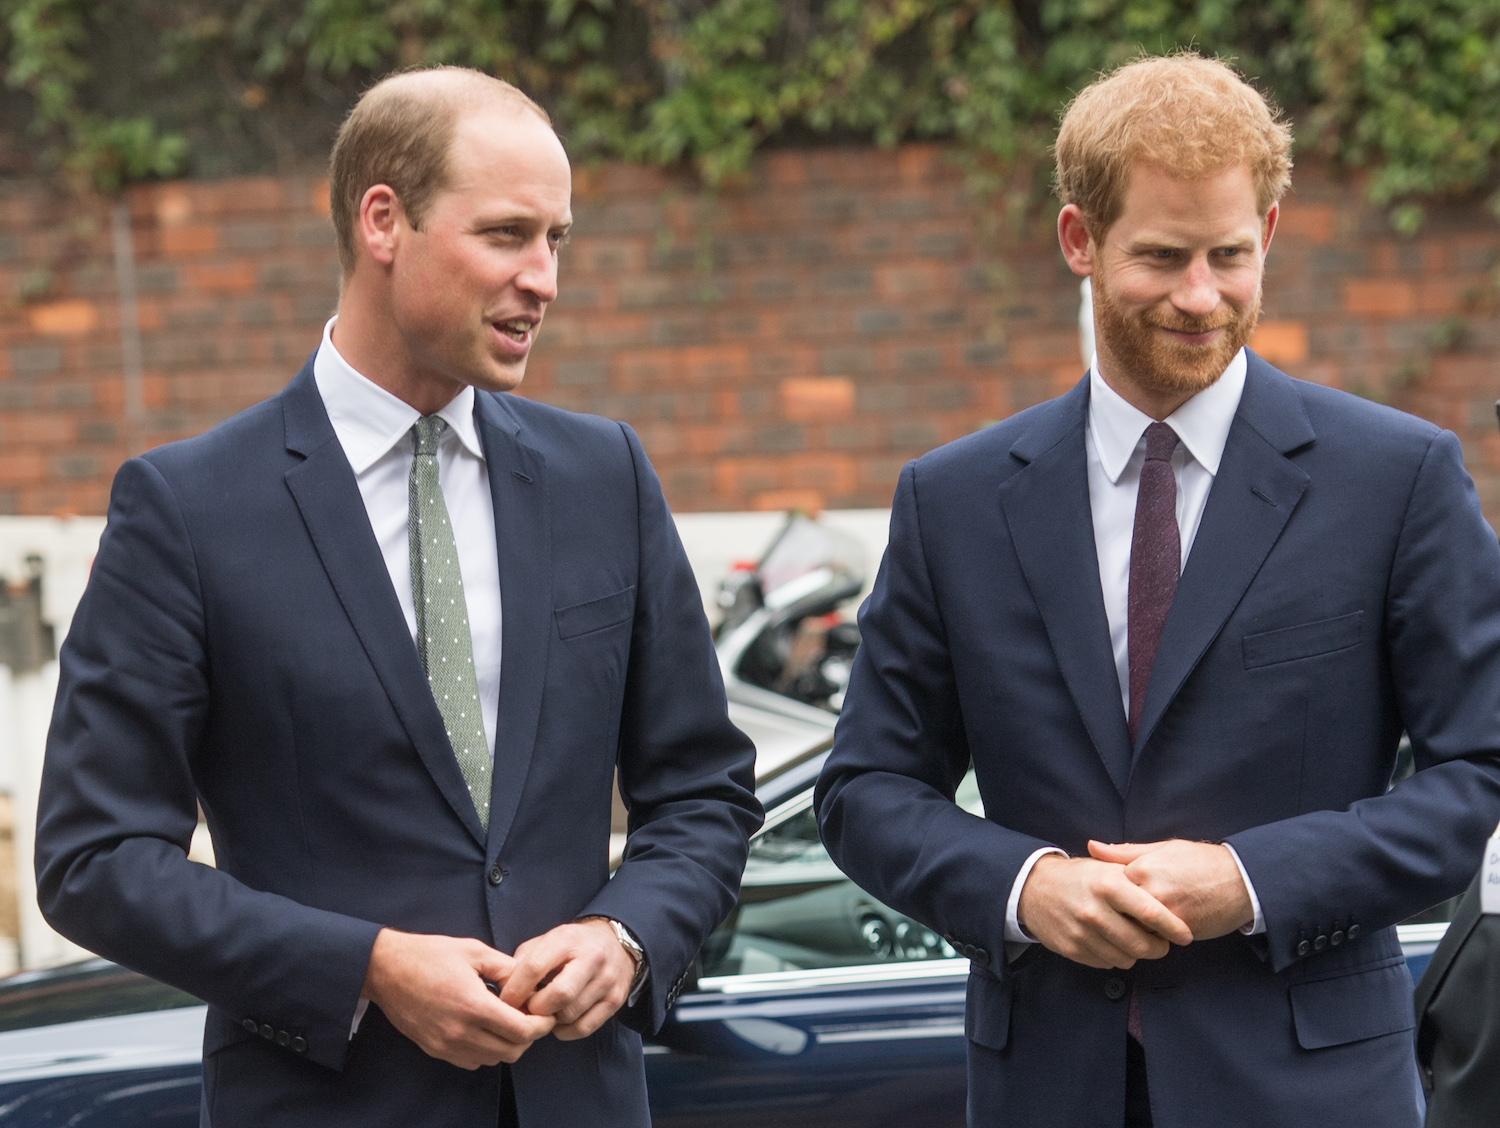 Prince William and Prince Harry visit the Royal Foundation Support4Grenfell community hub on September 5, 2017